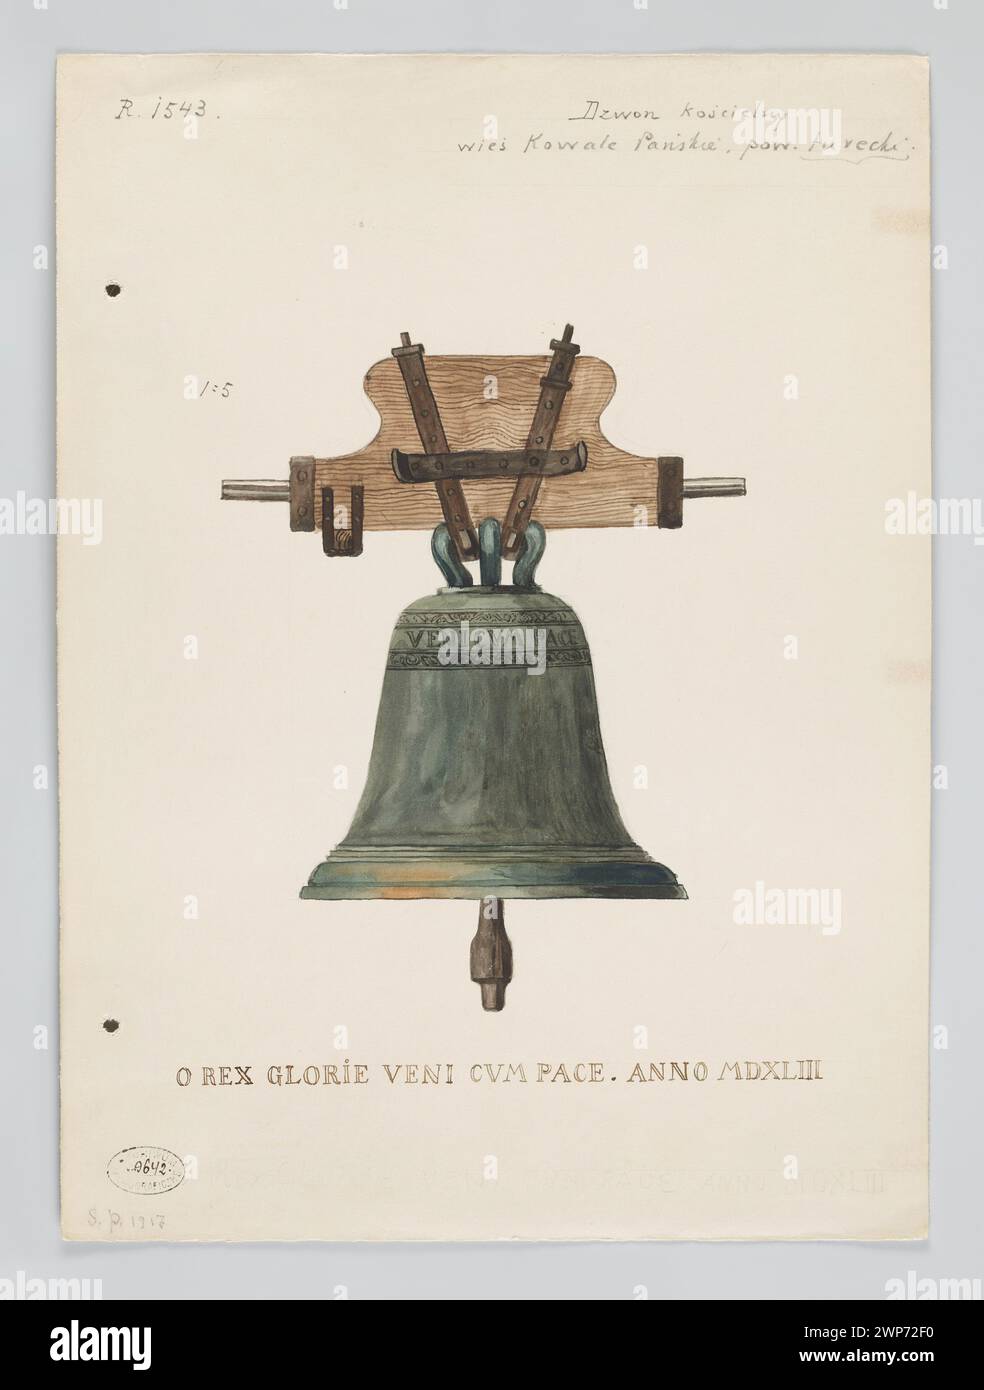 Bell of 1543 from the village of Kowale Pał Pretty, Szymon (Ca 1864-1942); 1917 (not after 6.10.1917) (1917-00-00-1917-00-00); Stock Photo